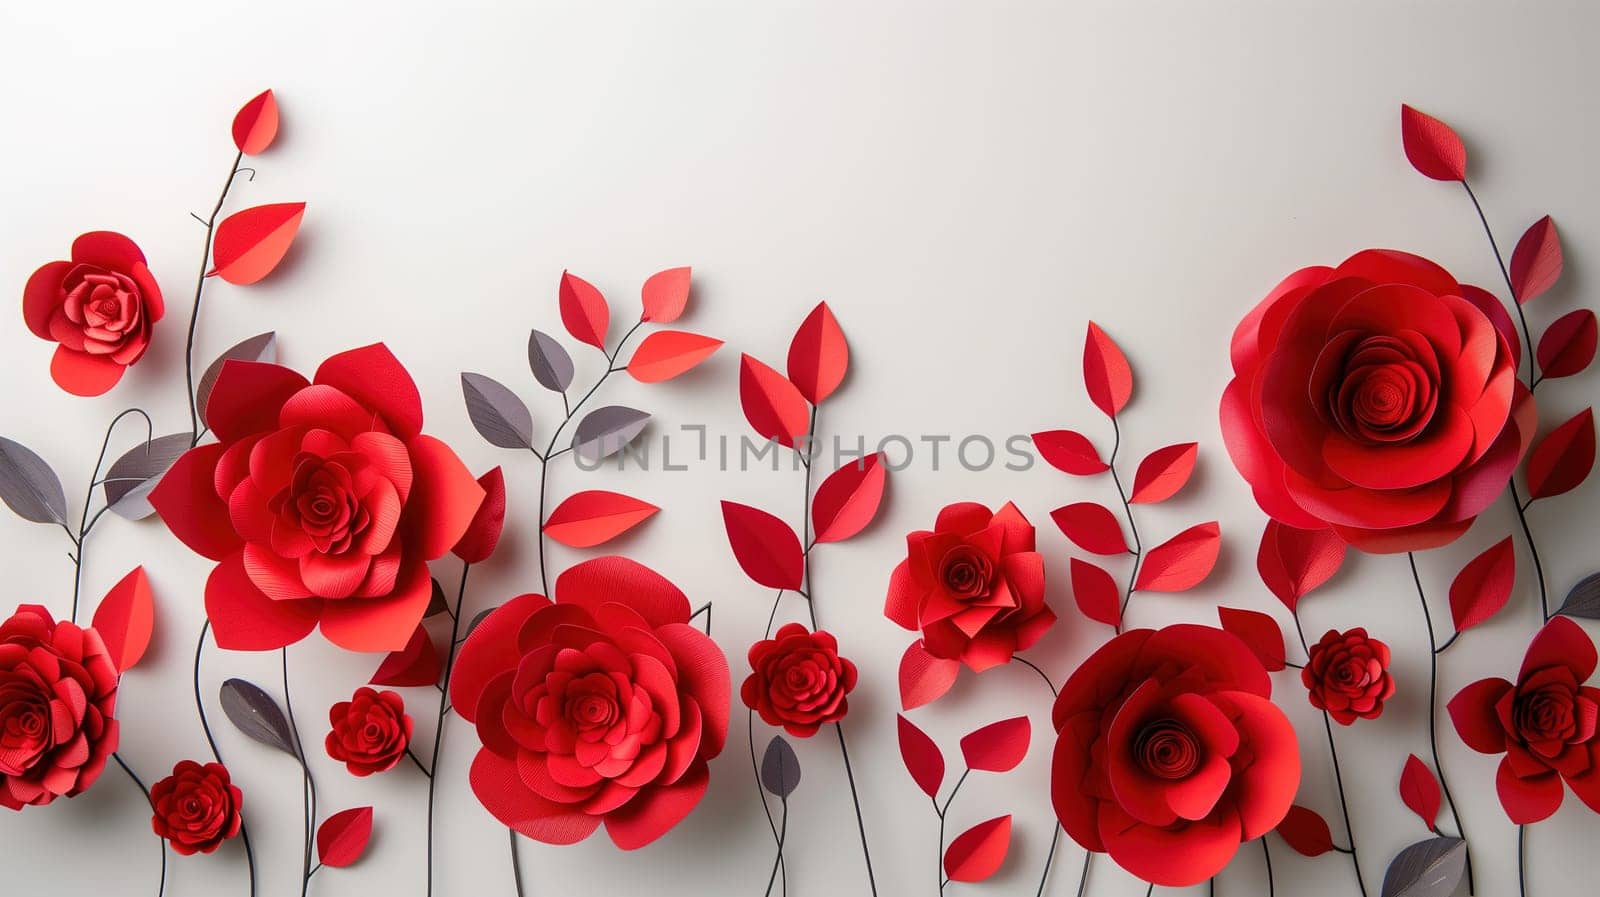 Red Paper Flowers Adorning White Wall by TRMK